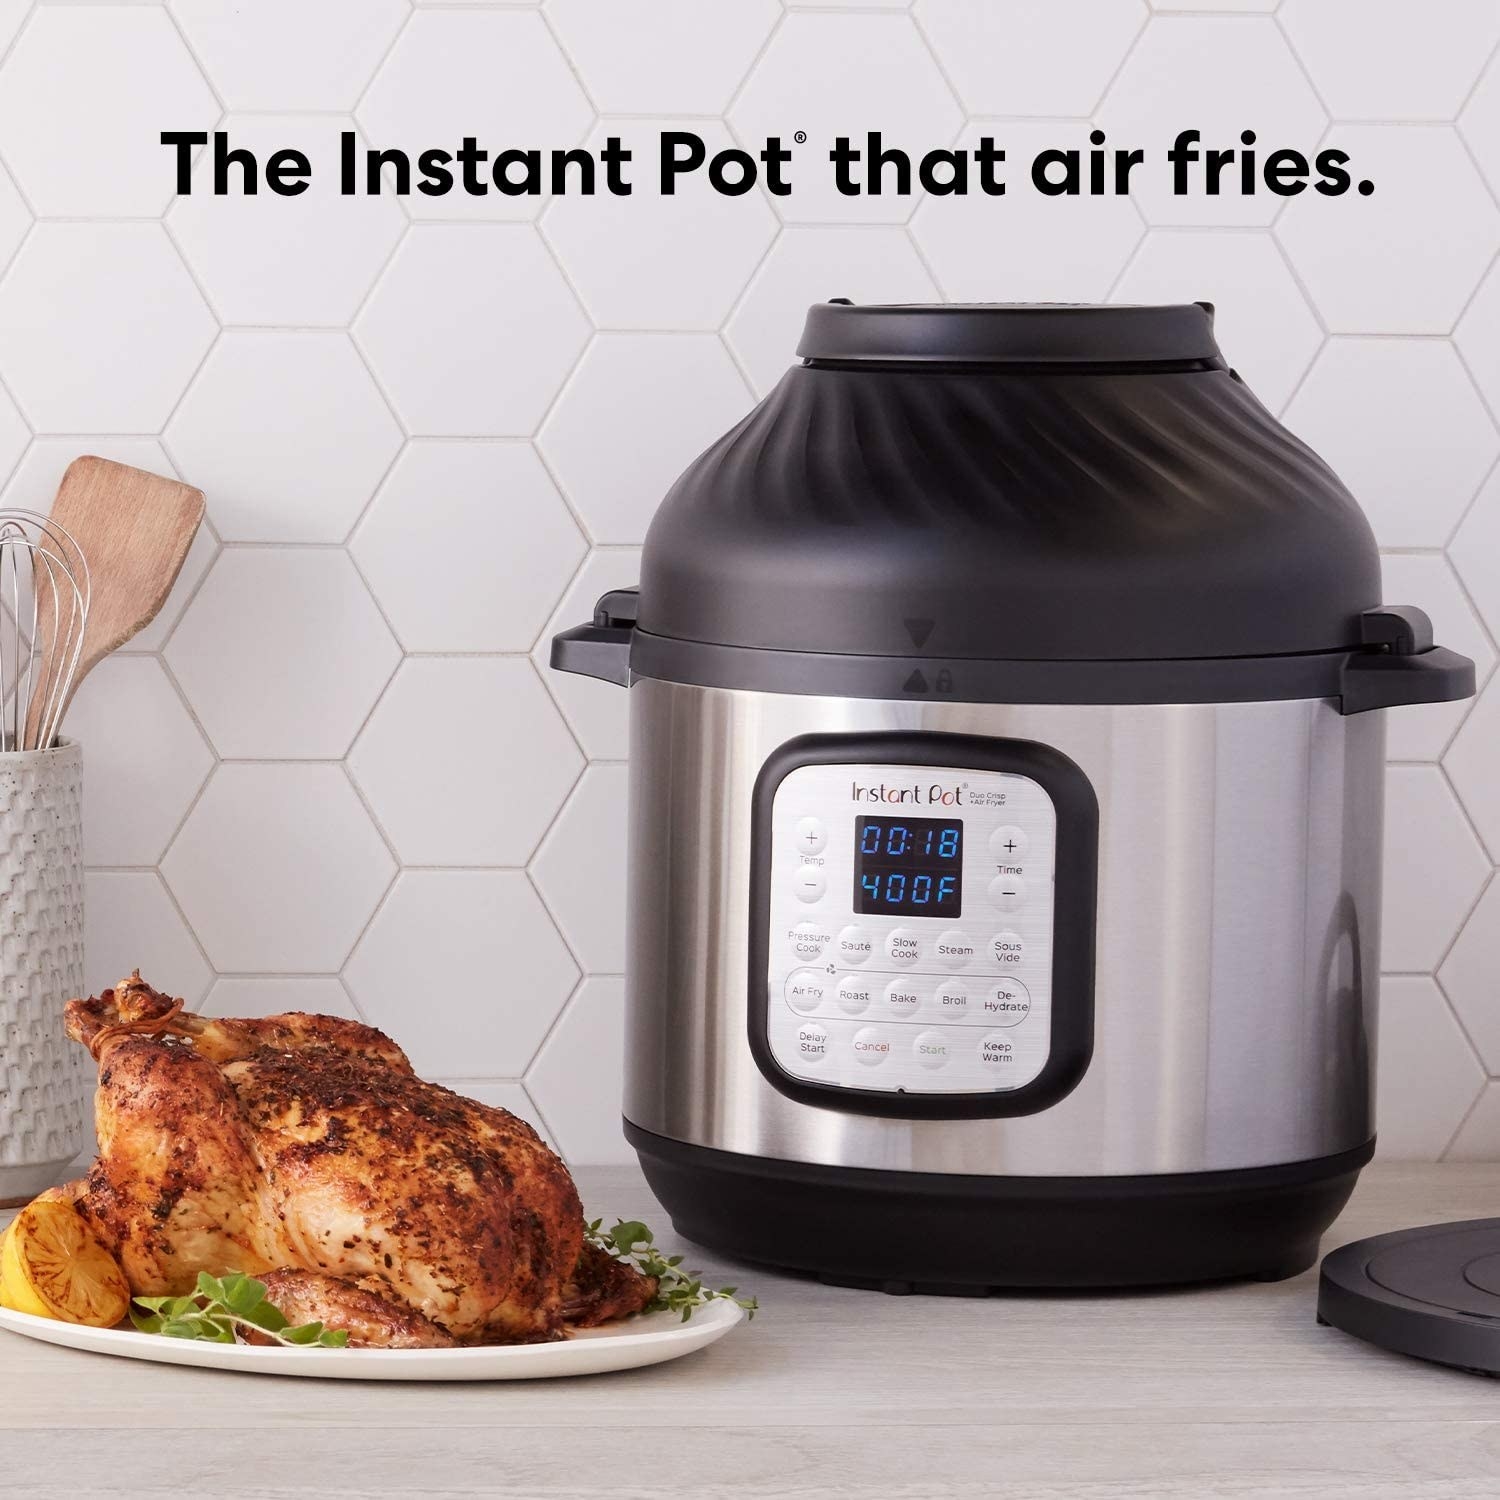 Metal instant pot with black base and top and digital screen and the text &quot;The instant pot that air fries&quot;